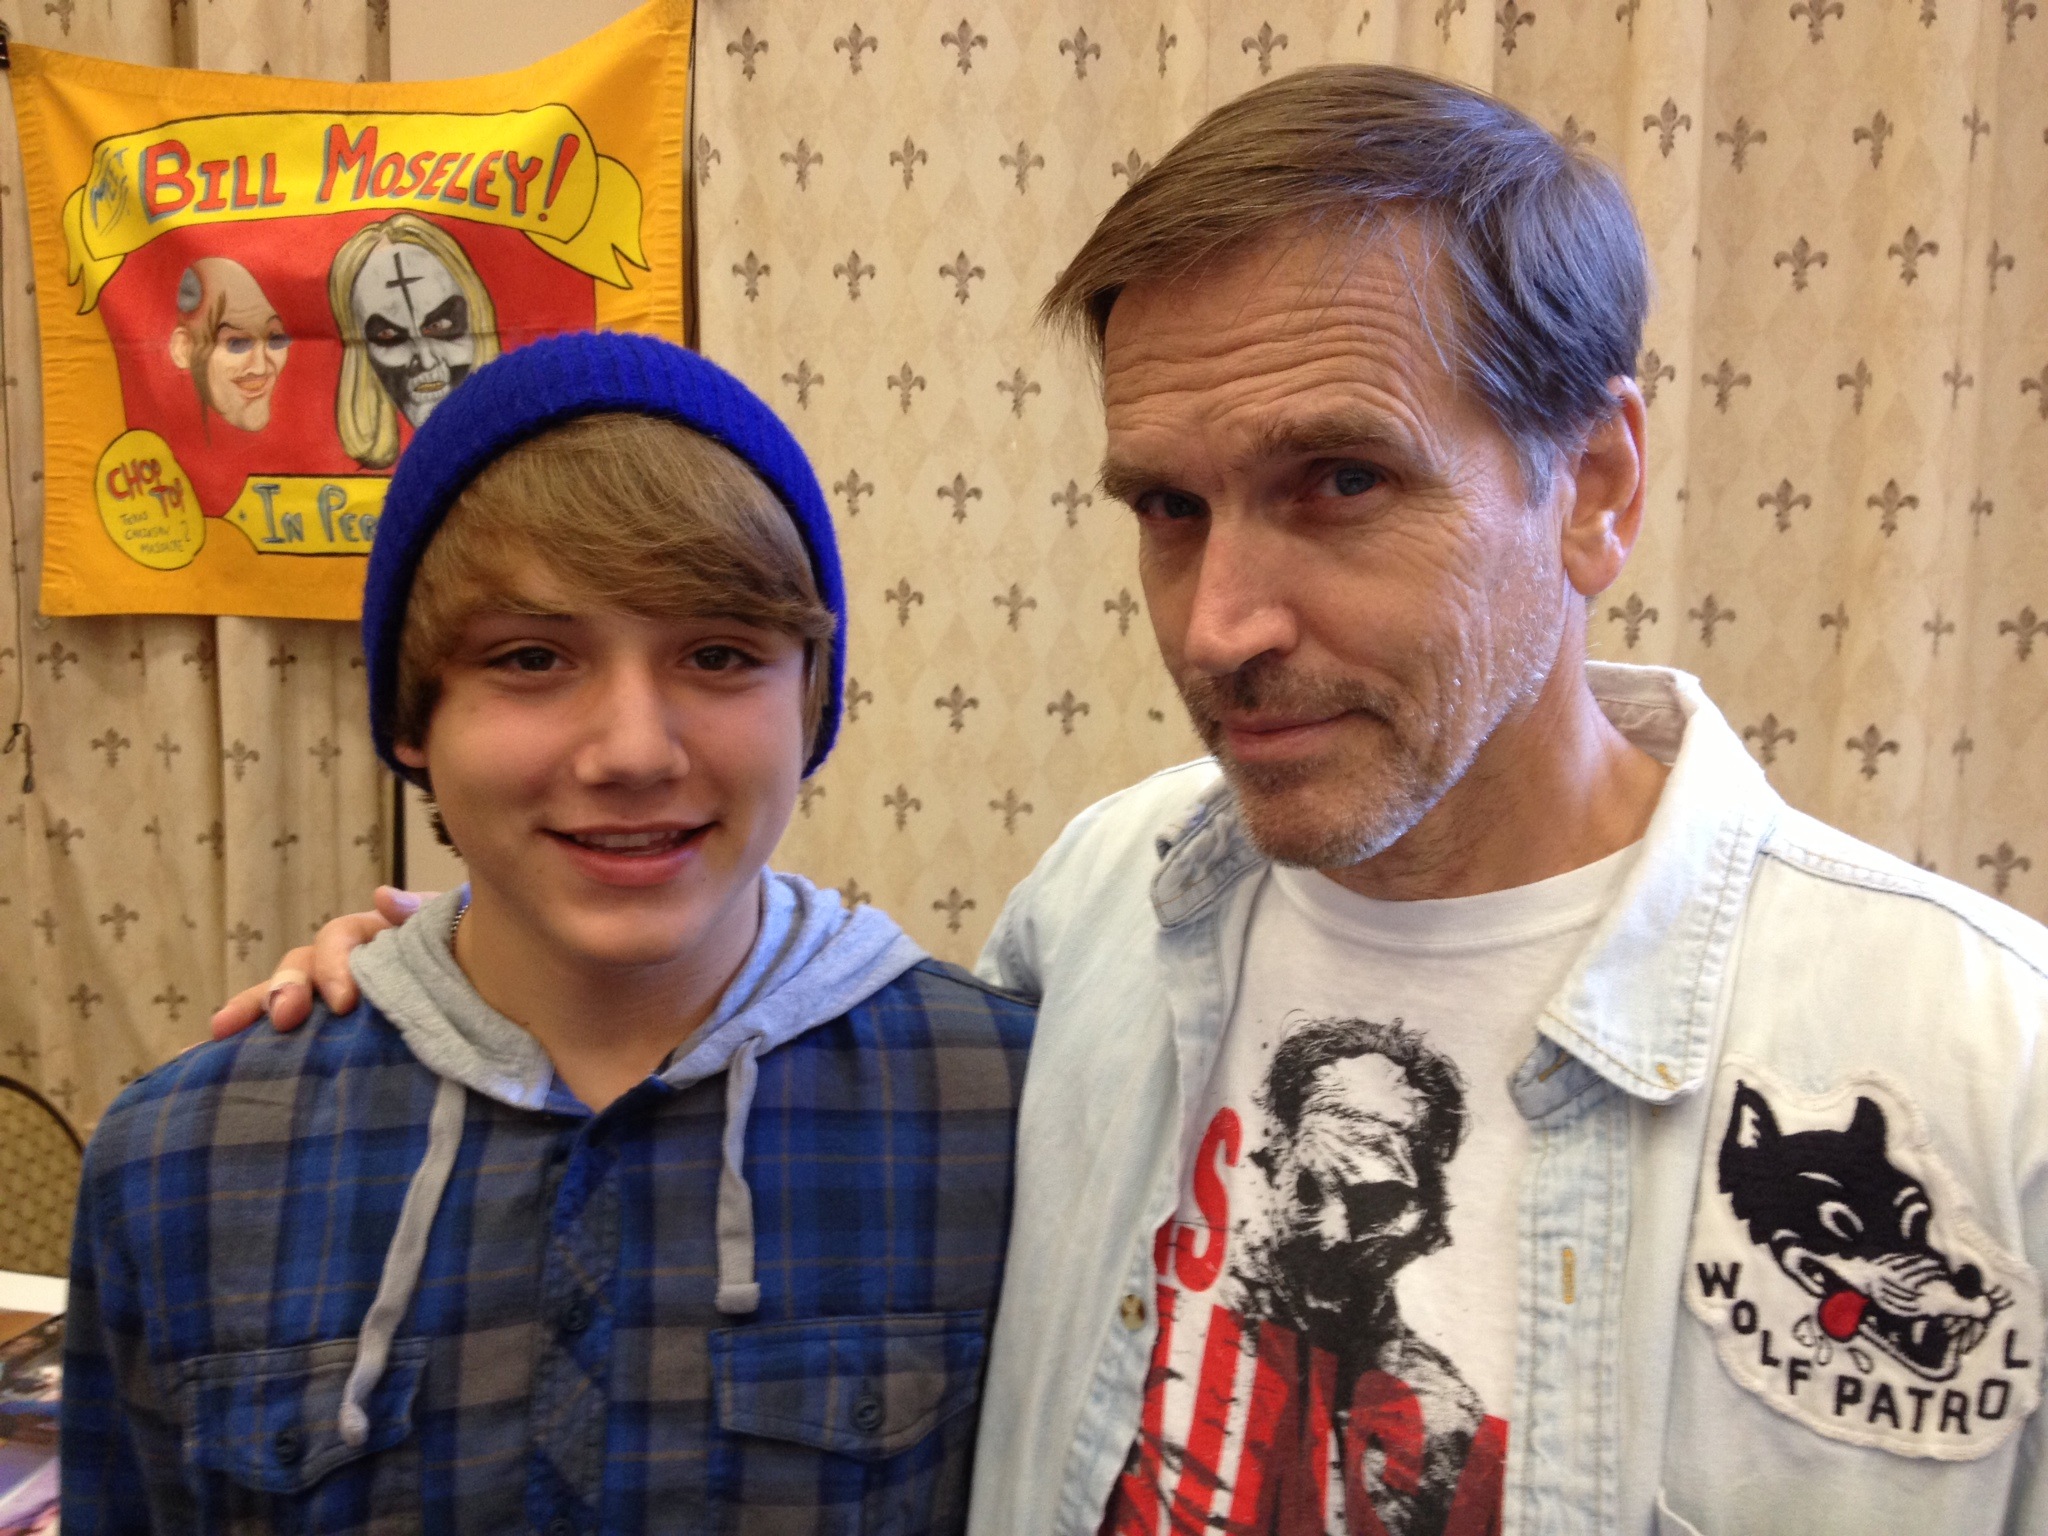 Towns Sanford with actor Bill Moseley at Spooky Empire in Orlando, Fl